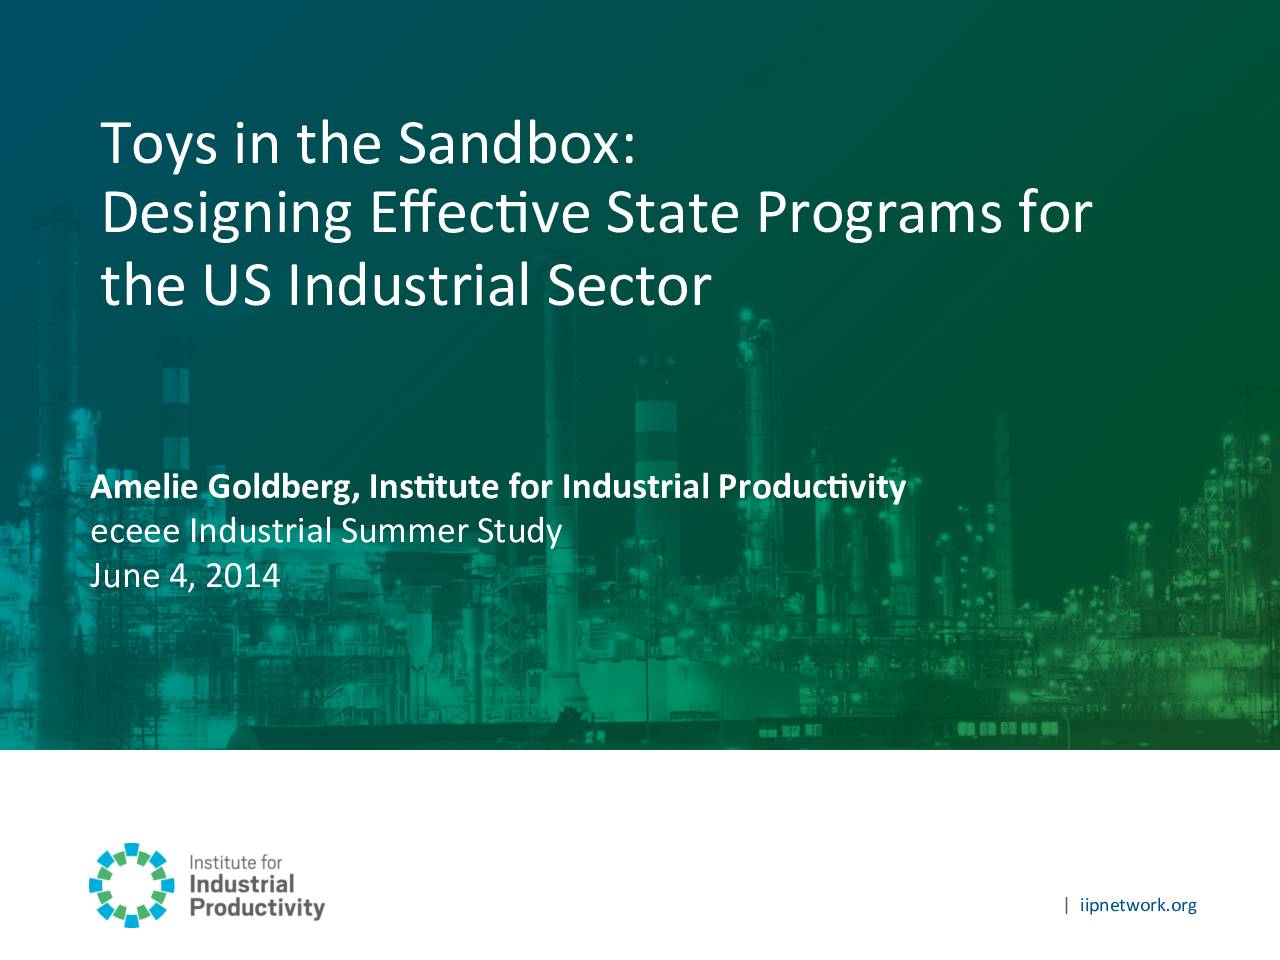 Toys in the Sandbox: Designing Effective State Programs for the US Industrial Sector